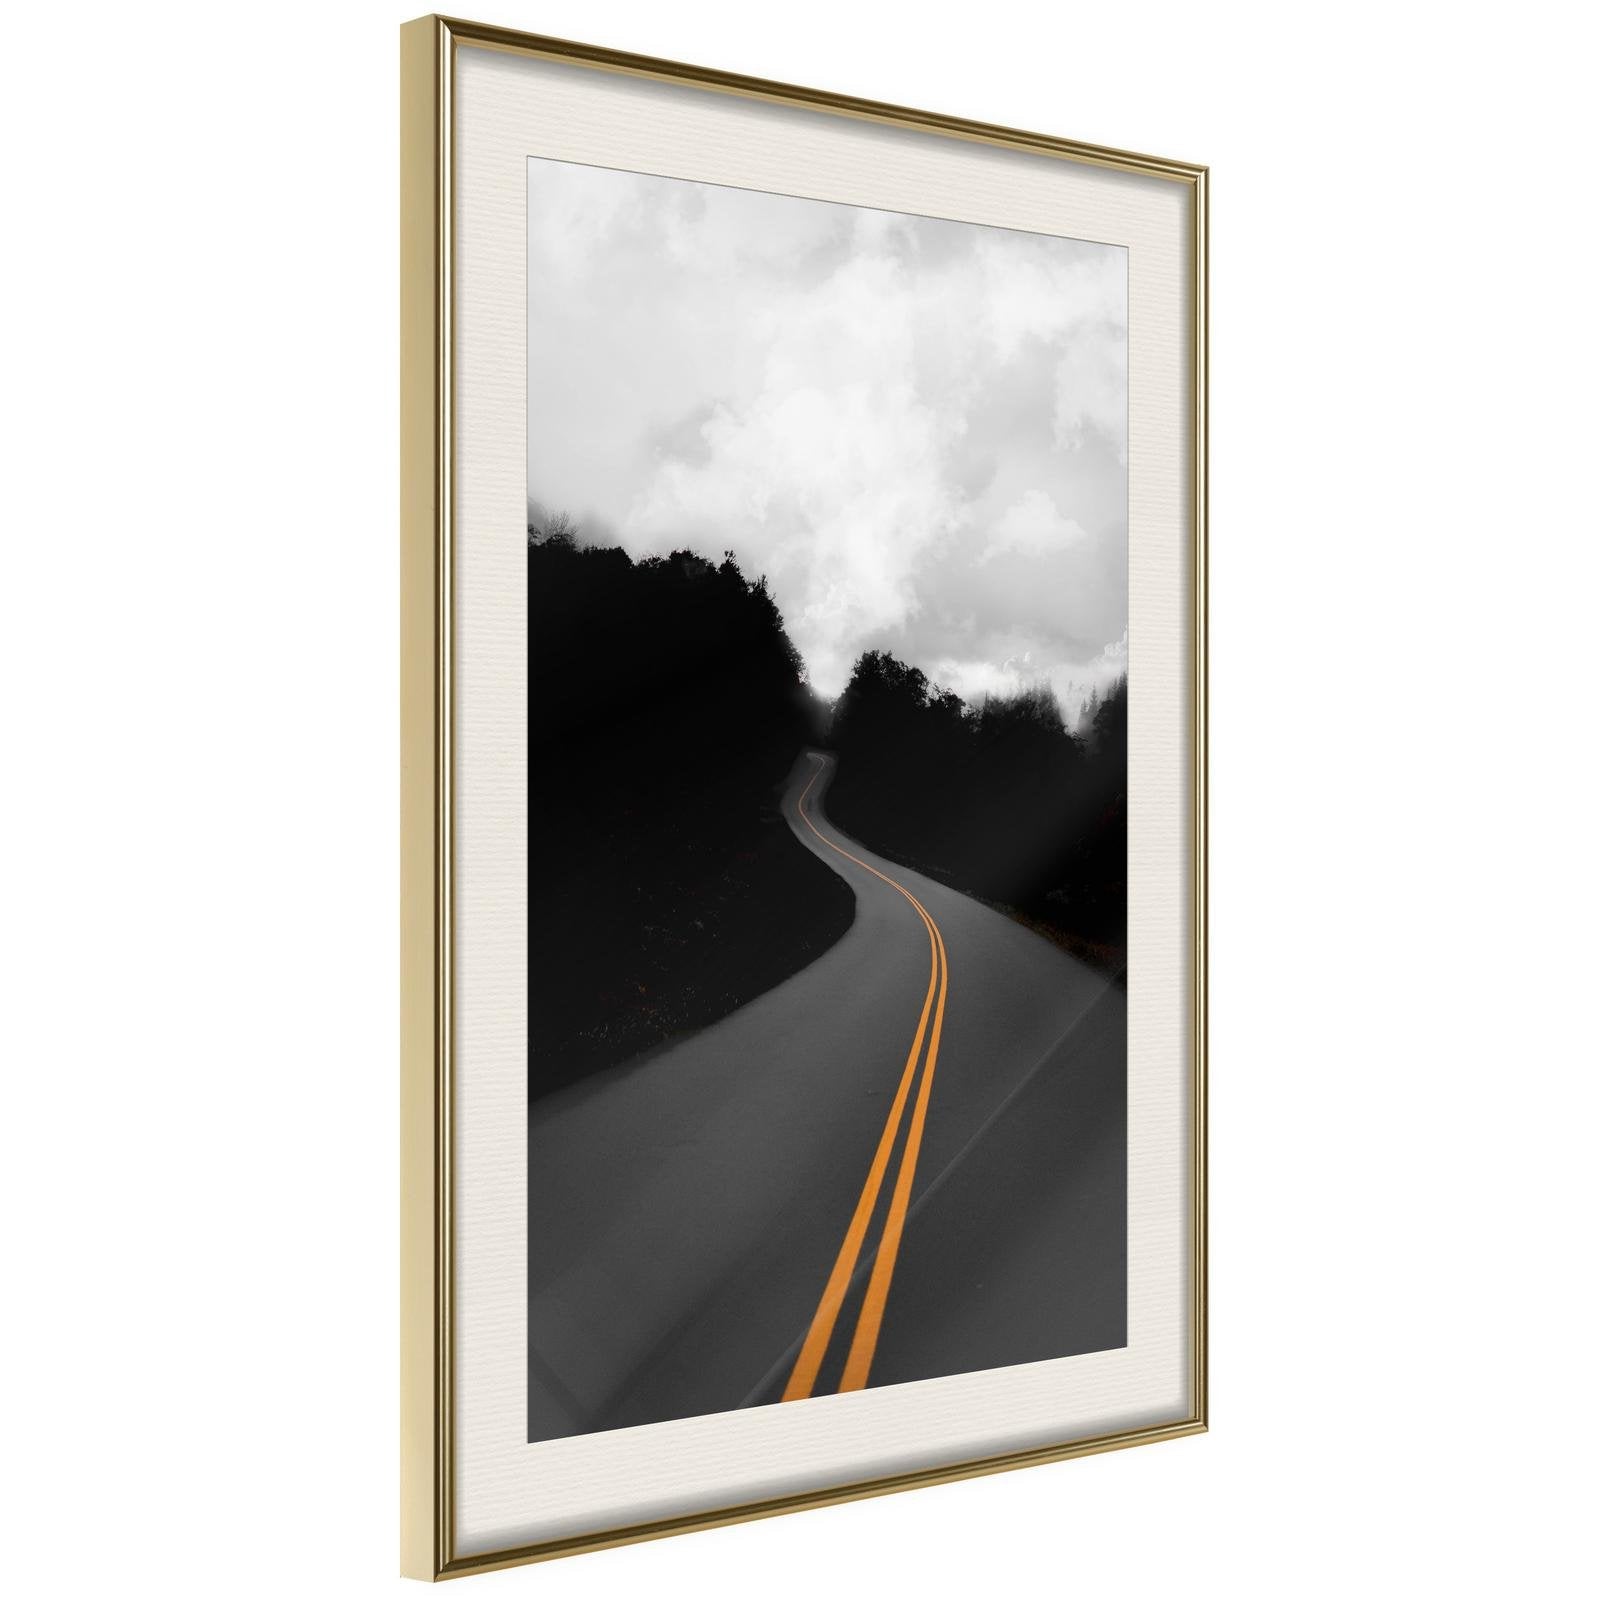 Inramad Poster / Tavla - Road Into the Unknown-Poster Inramad-Artgeist-20x30-Guldram med passepartout-peaceofhome.se